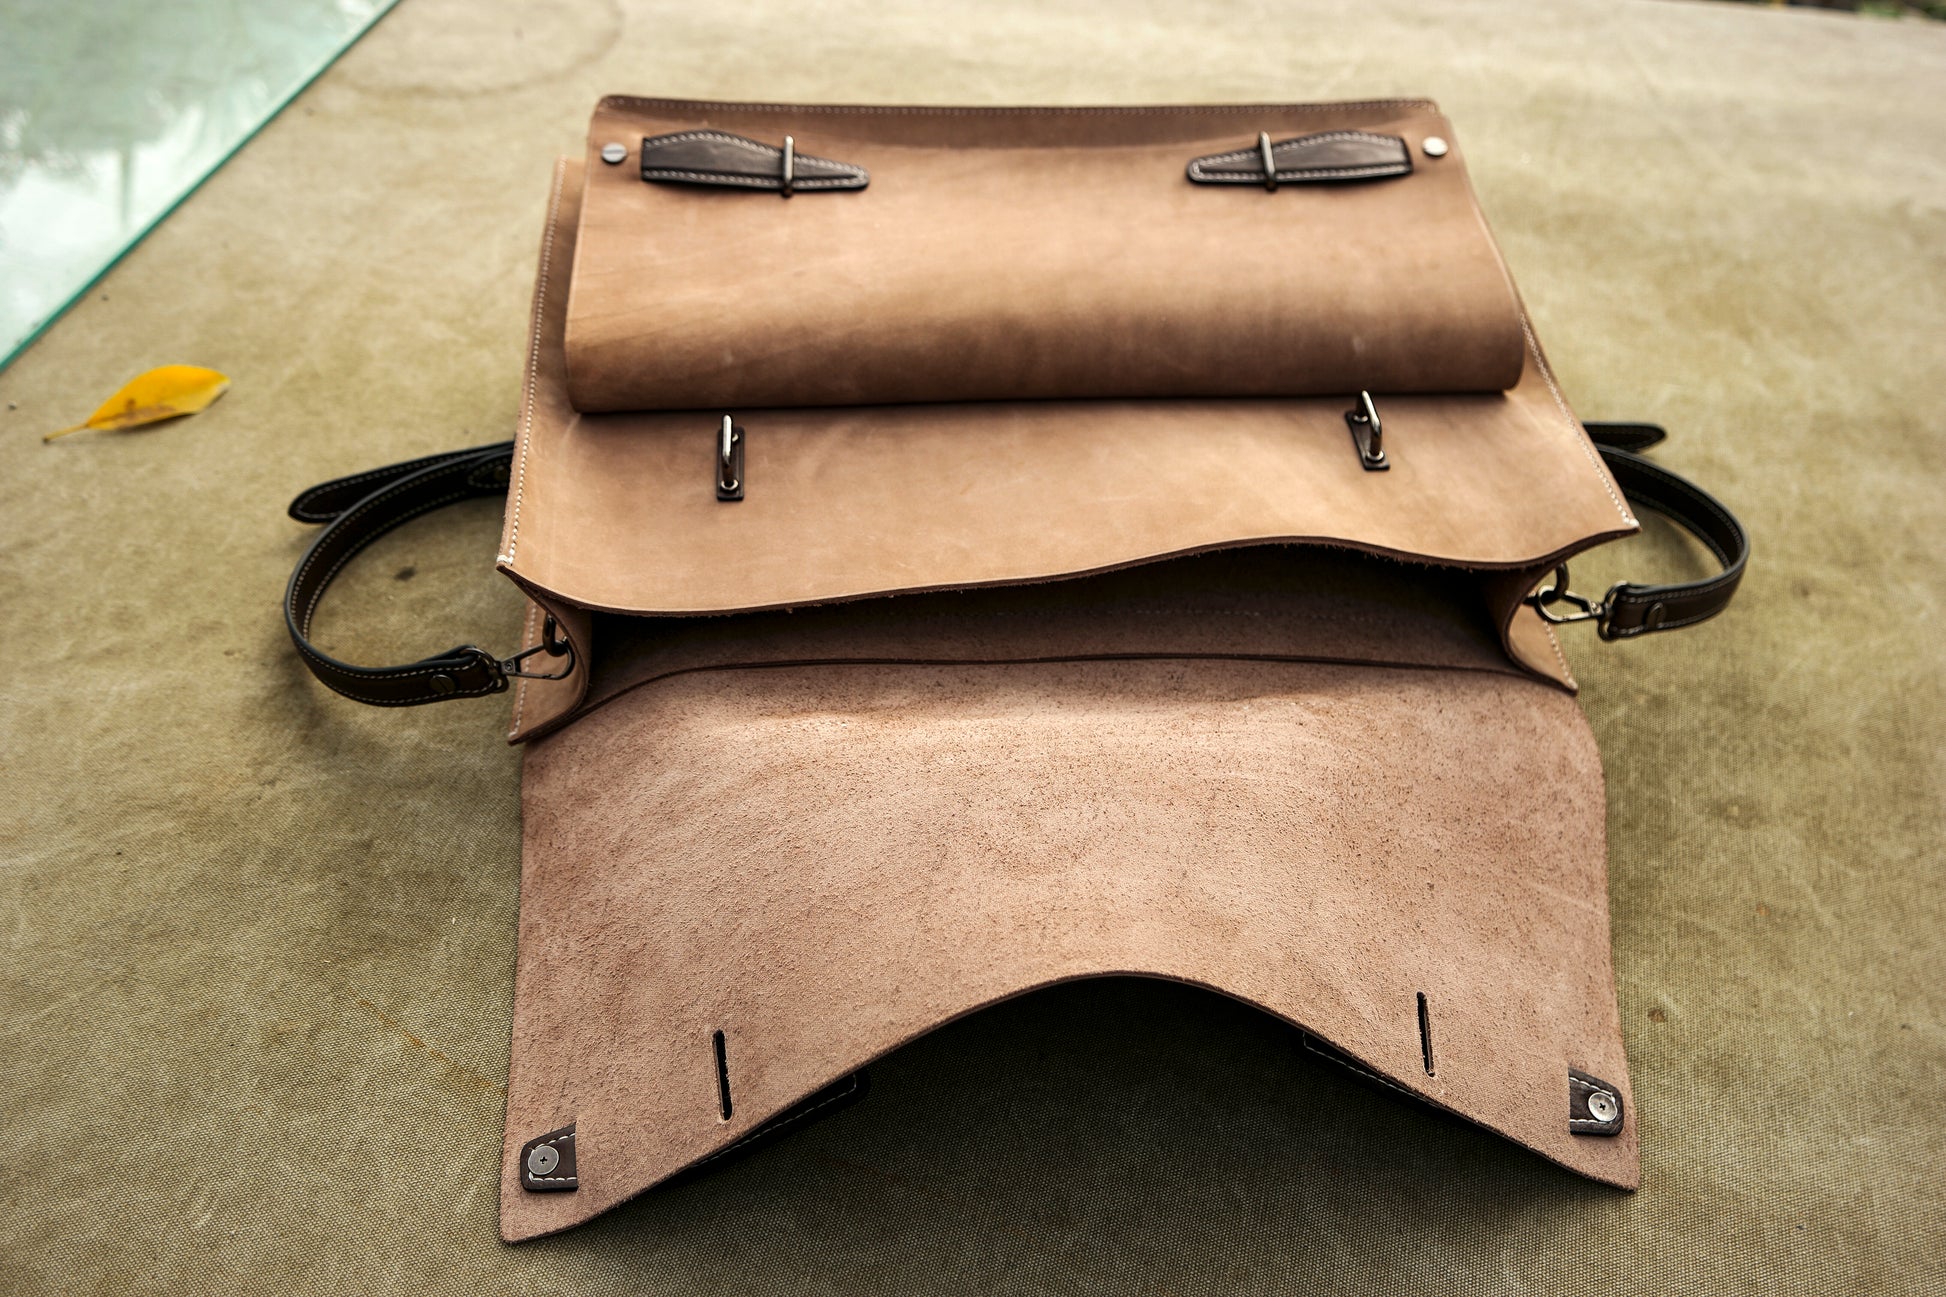 【Physical Pattern】Vegetable tanned leather backpack/Leather knapsack made by copying Russian handmade knapsack pattern